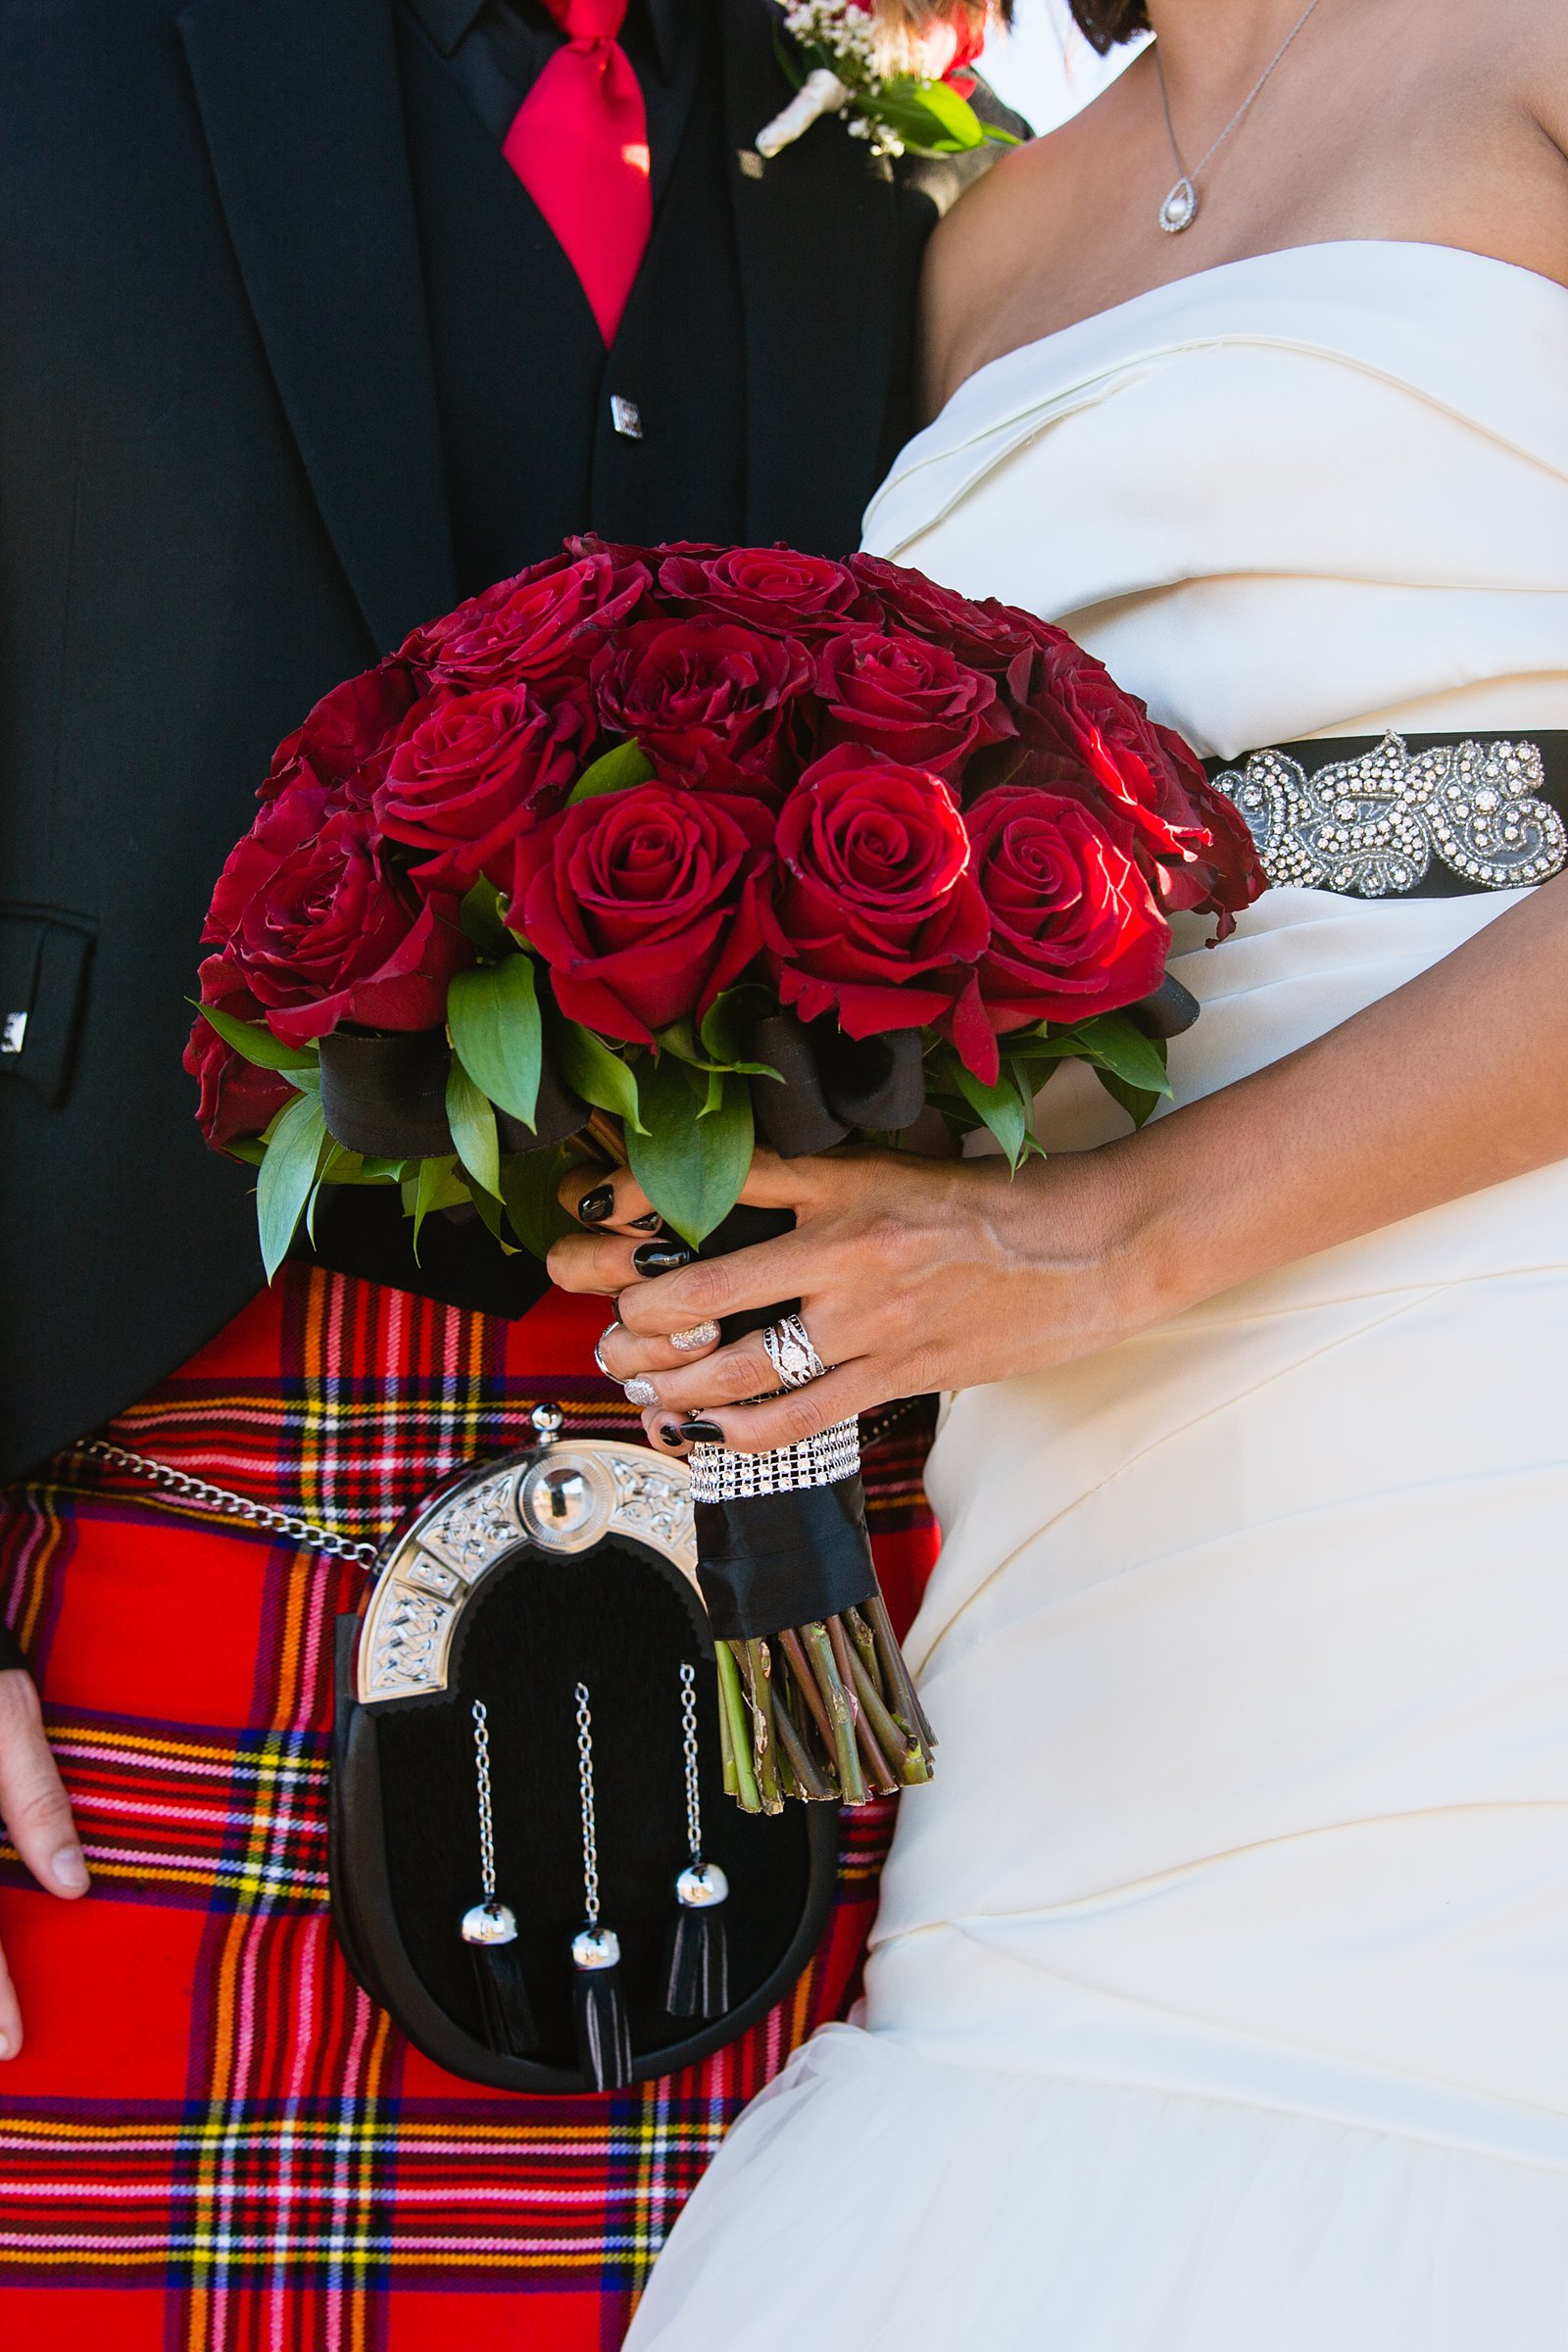 Red rose bouquet with red Scottish kilt by Mesa wedding photographer PMA Photography.